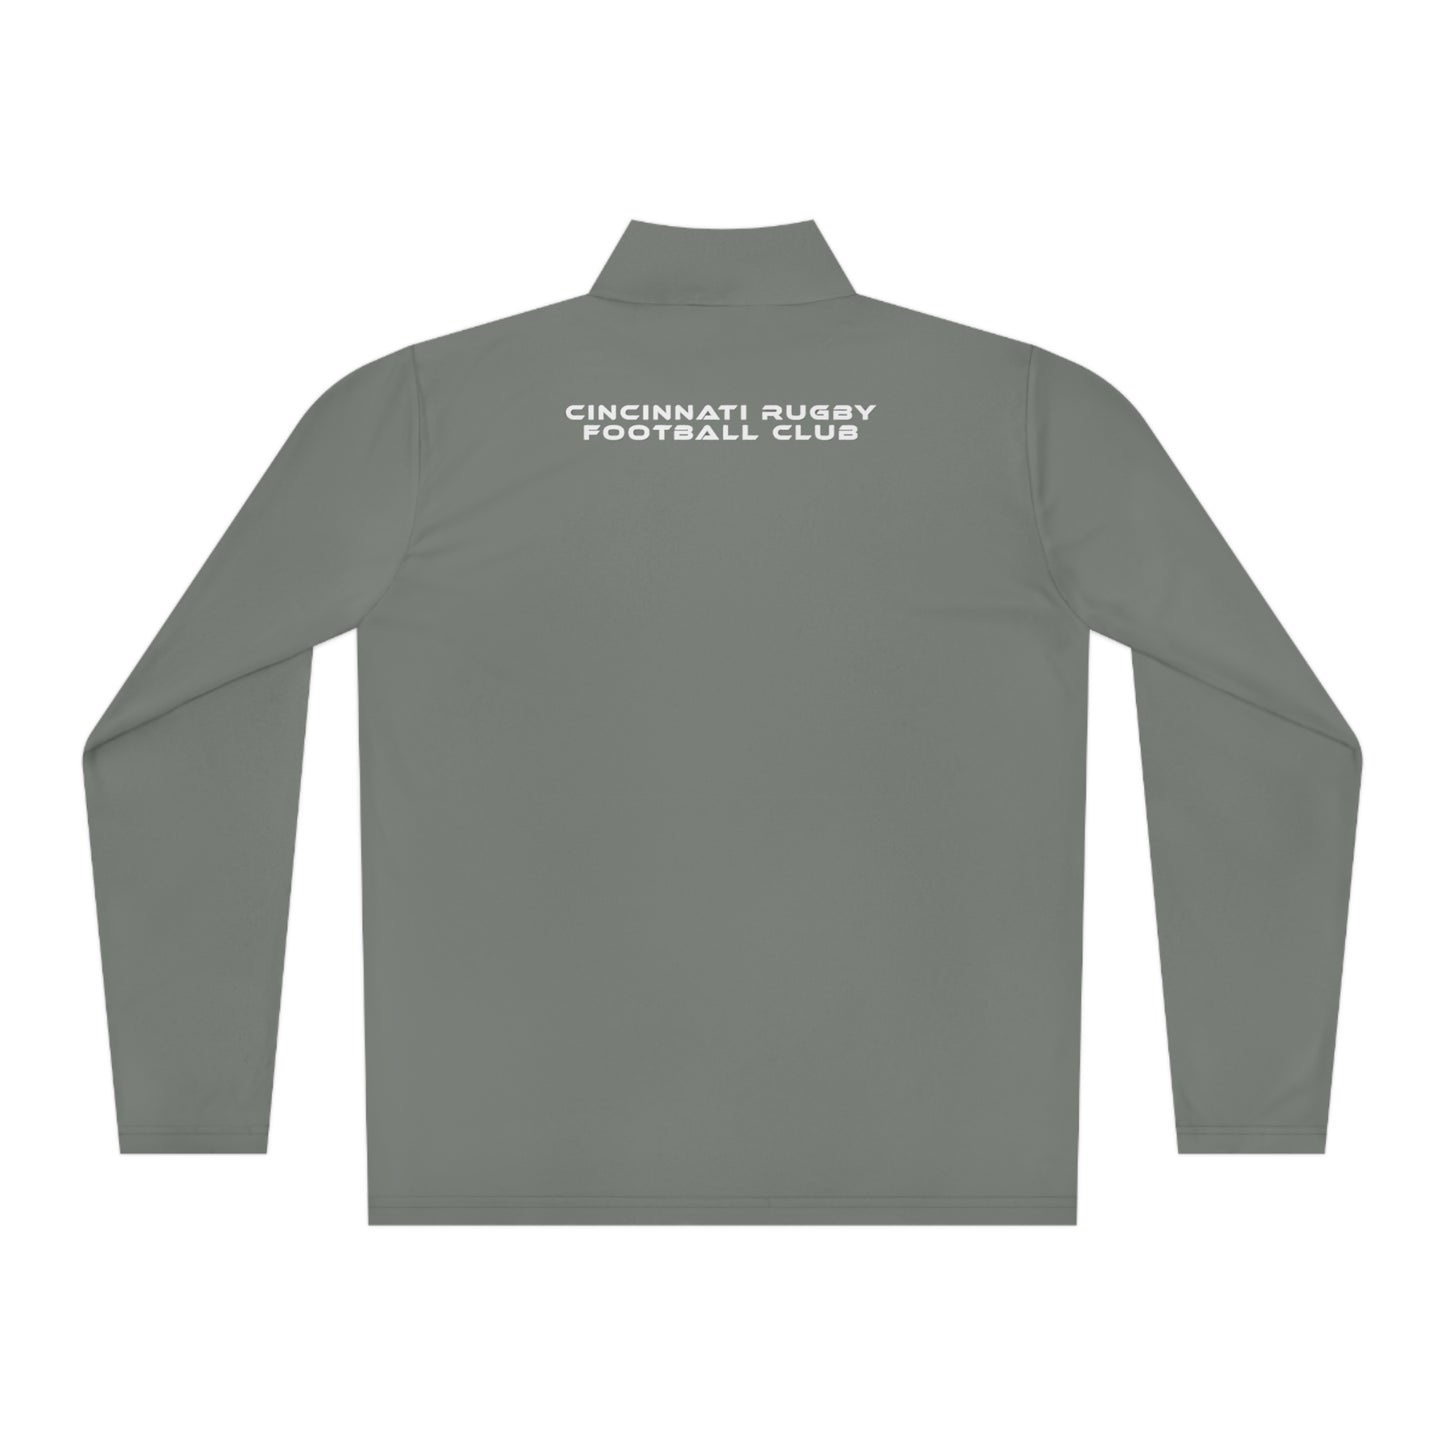 Unisex Quarter-Zip Pullover | CRFC Wolfhounds White Crest